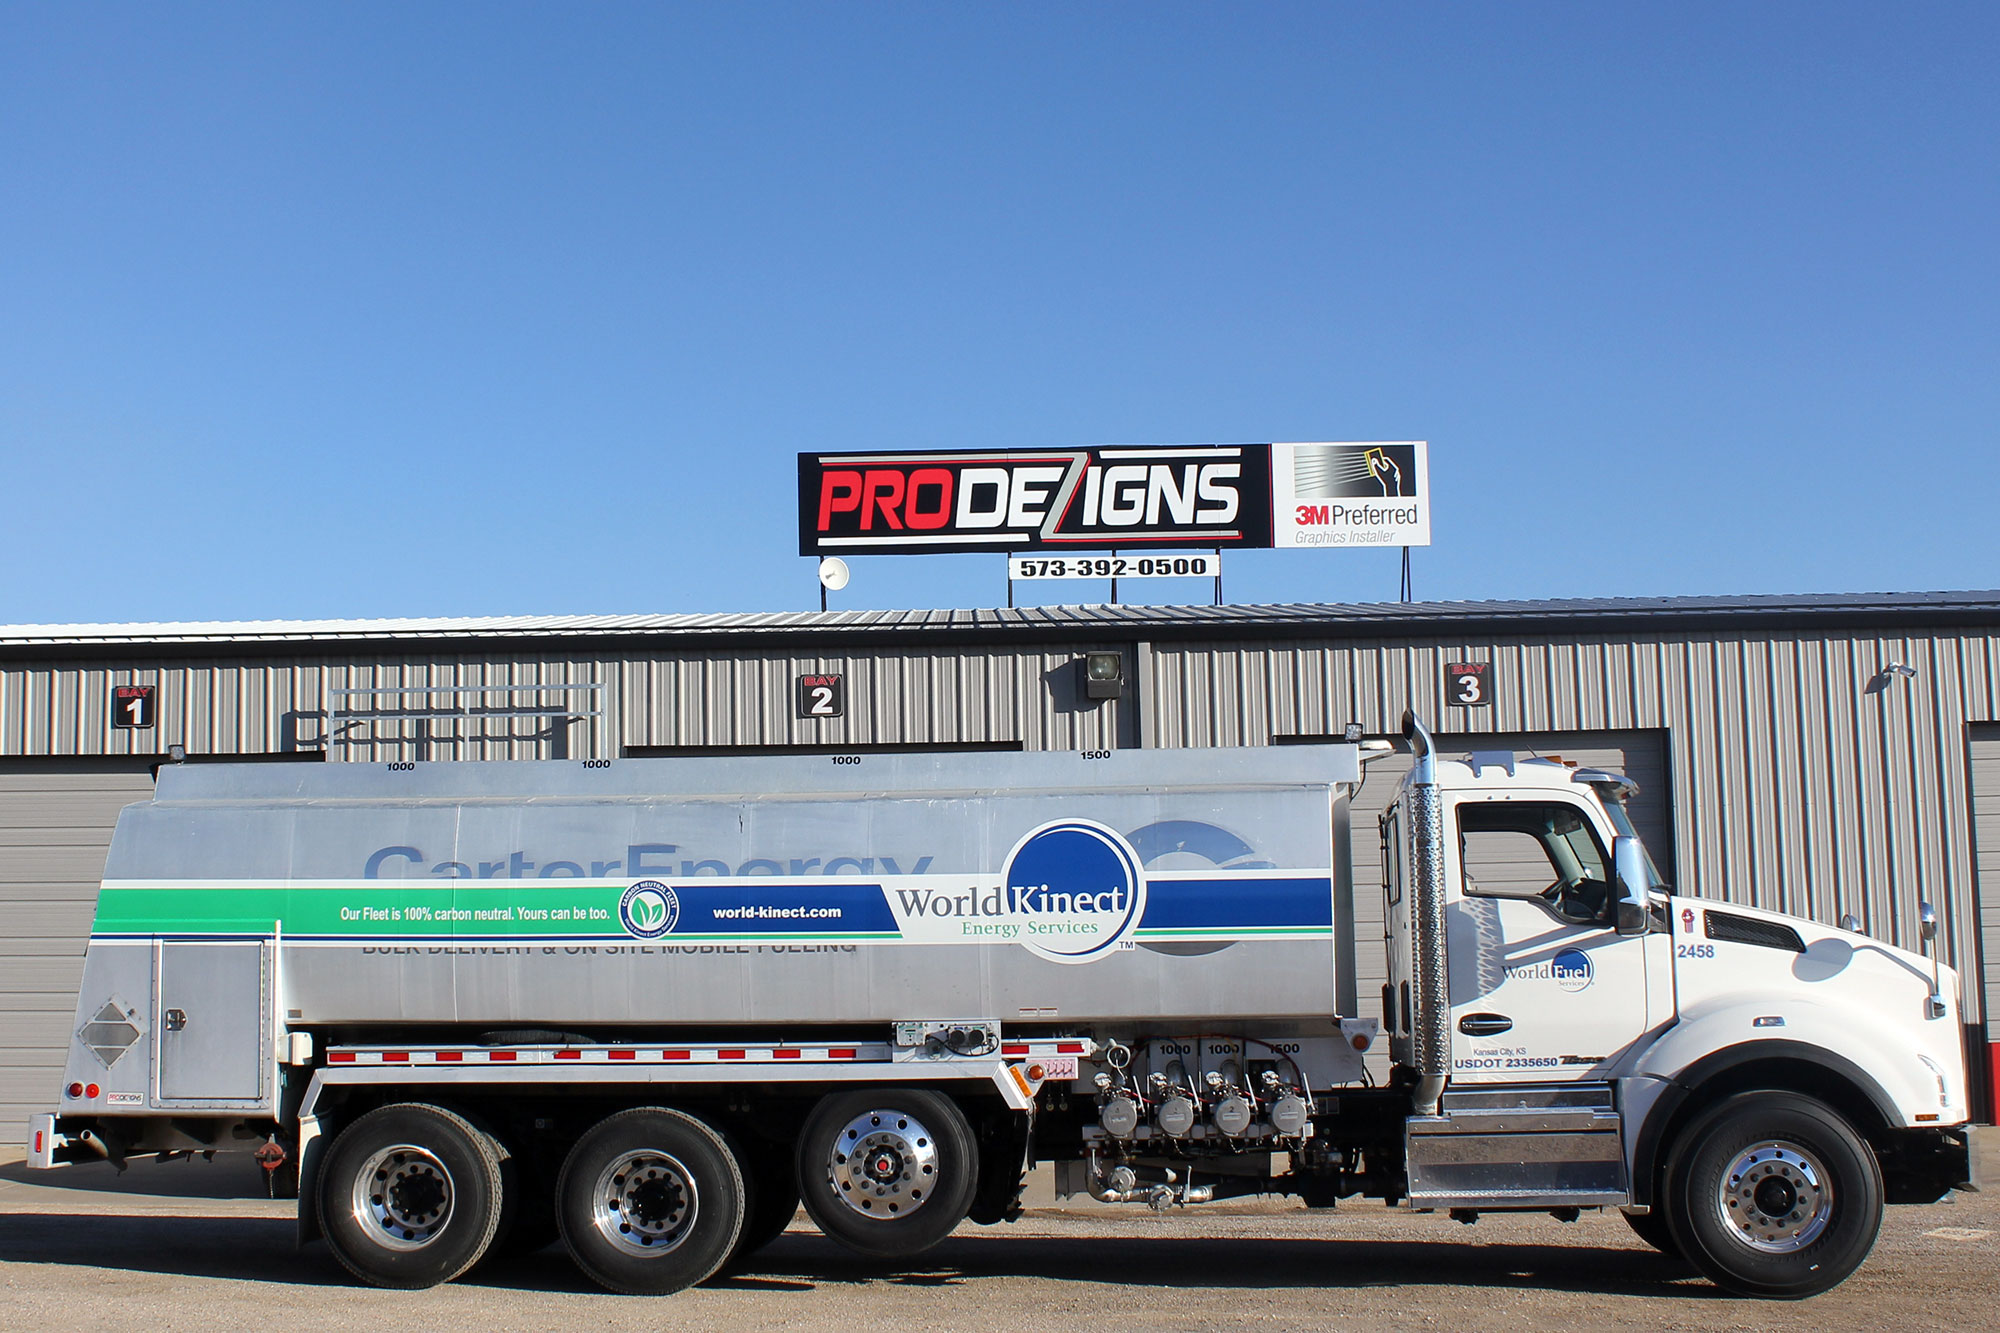 World Kinect Tanker Vehicle Wraps Store Fronts Windows Outdoor Pro Dezigns Columbia Mo